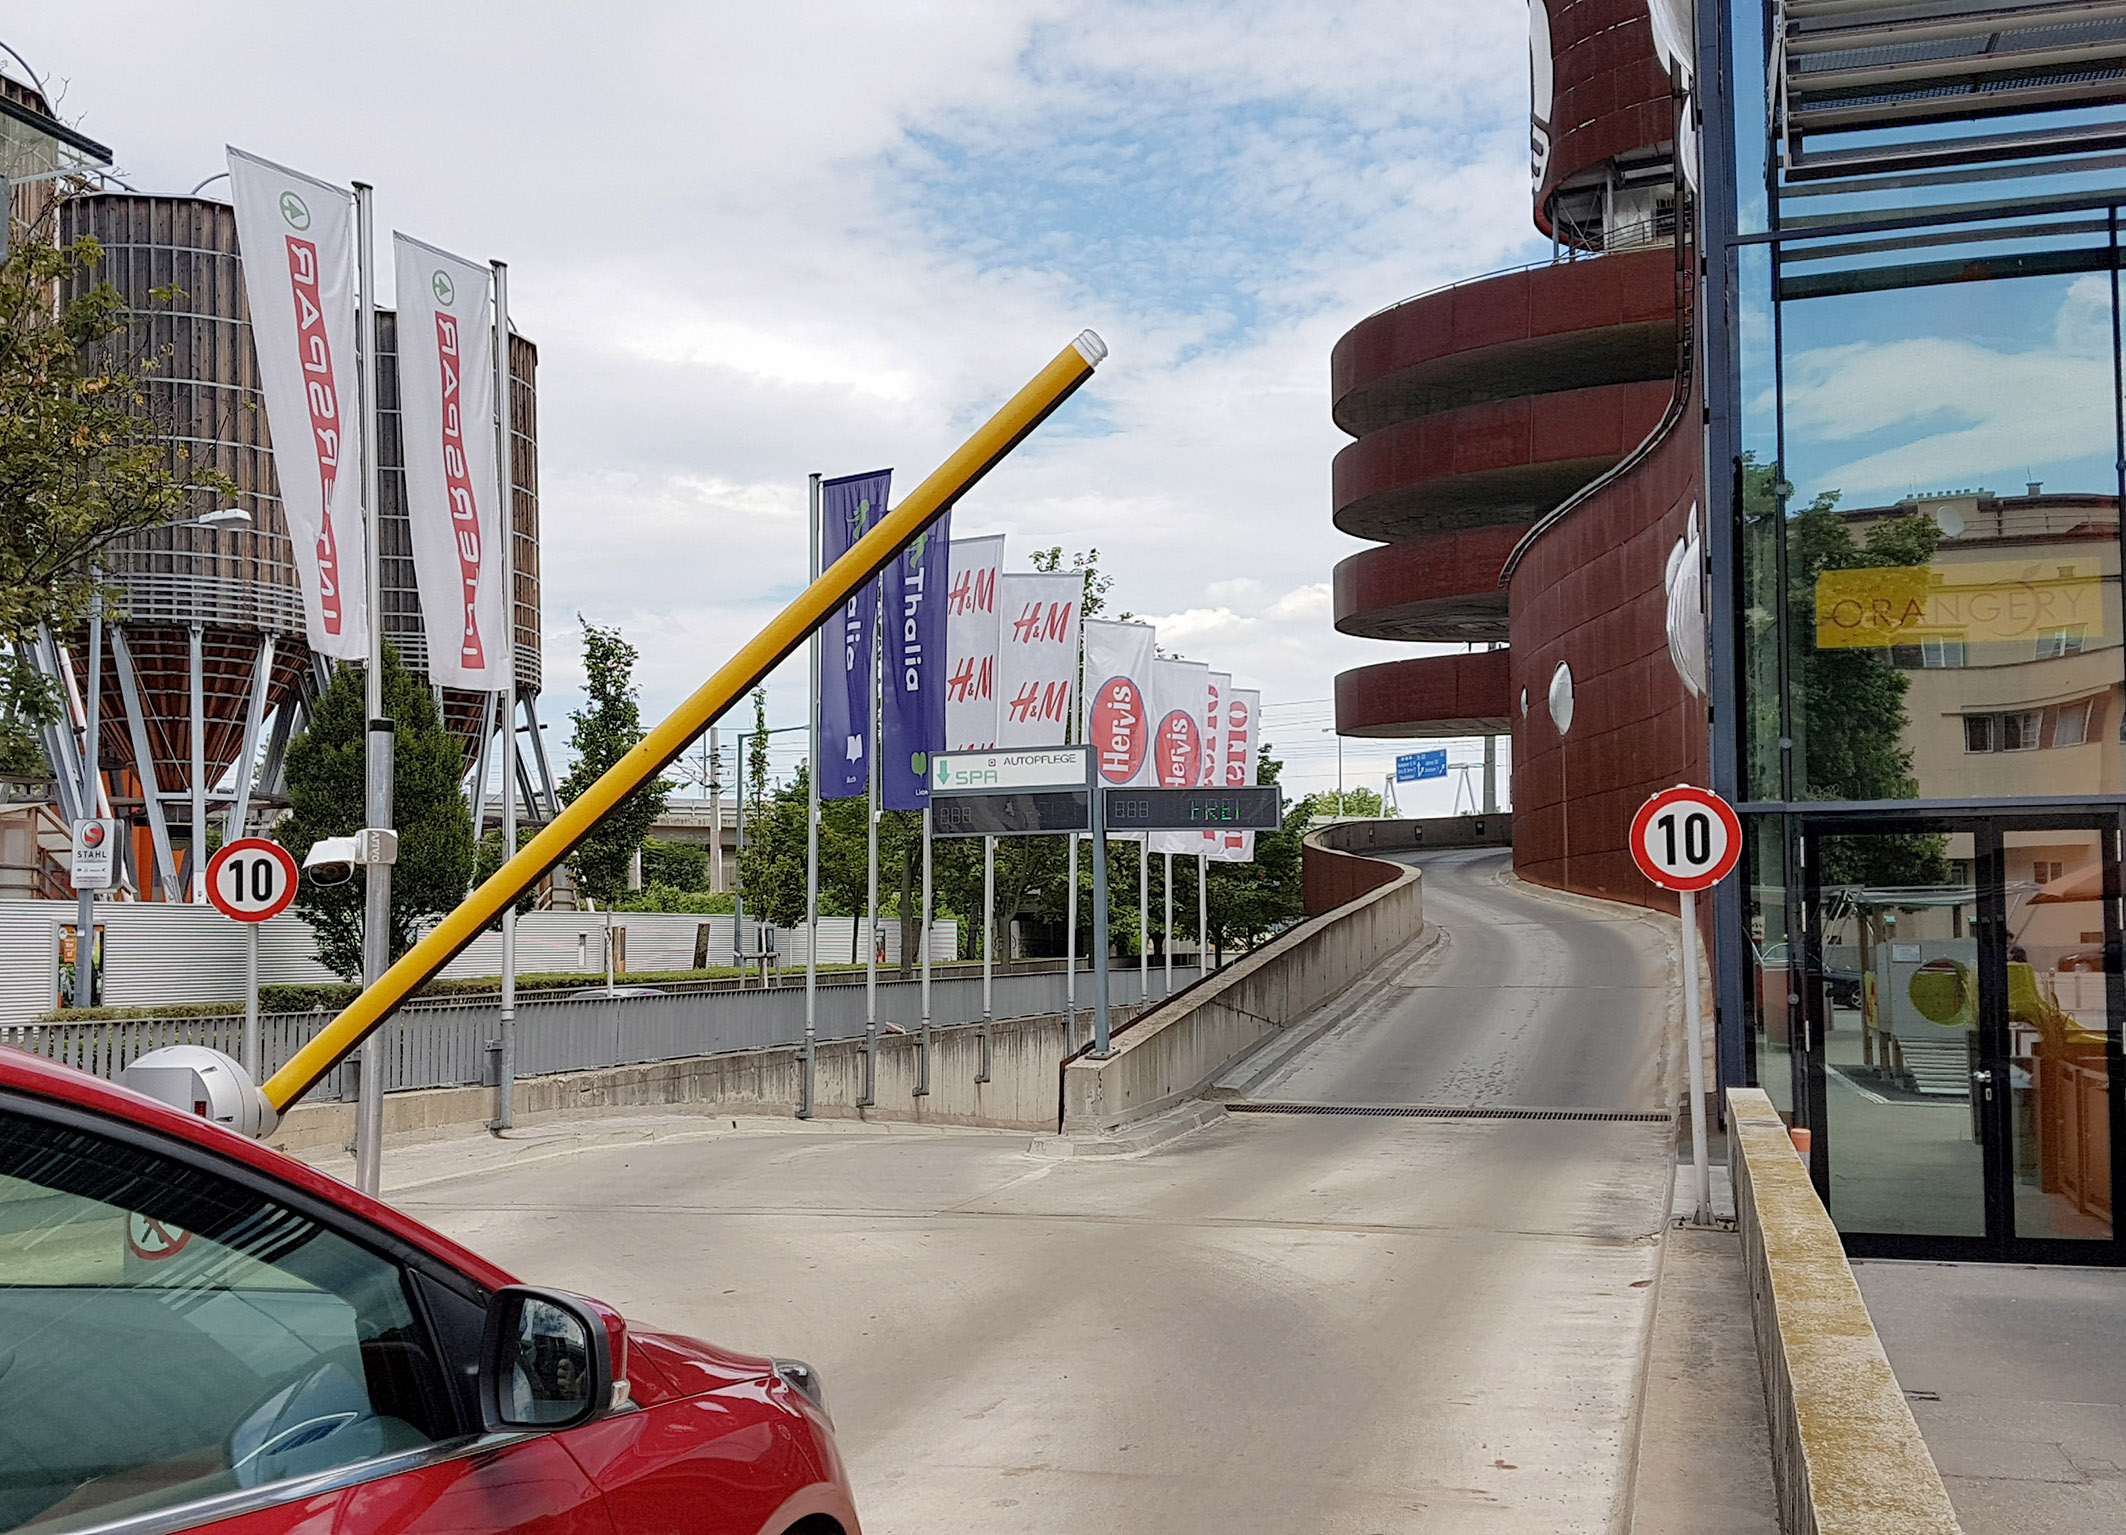 Arivo’s Automatic License Plate Recognition manages 610 parking spaces at the Q19 Center